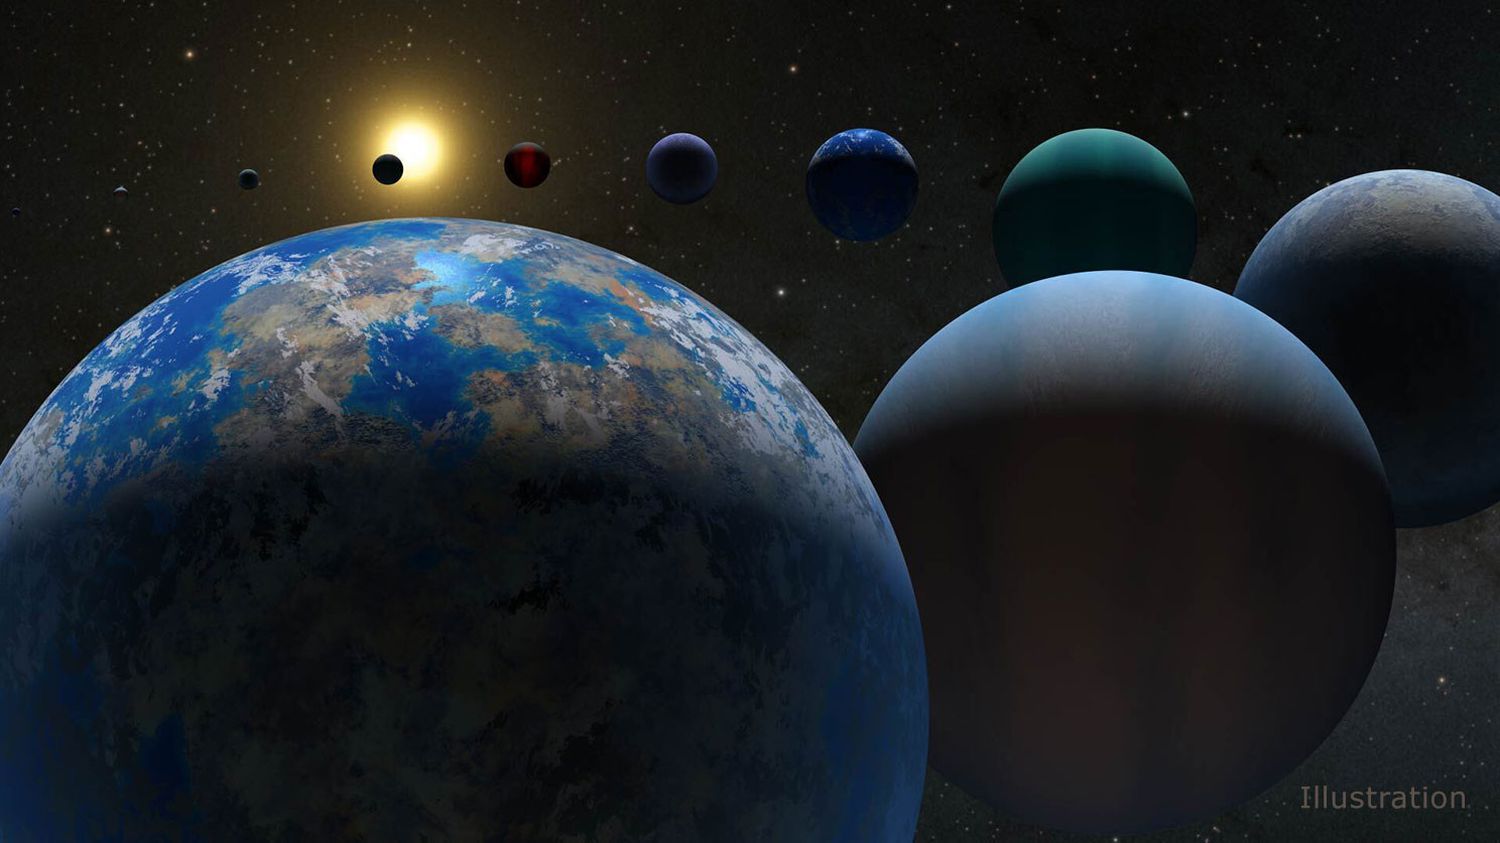 5,000 exoplanets have been discovered!

